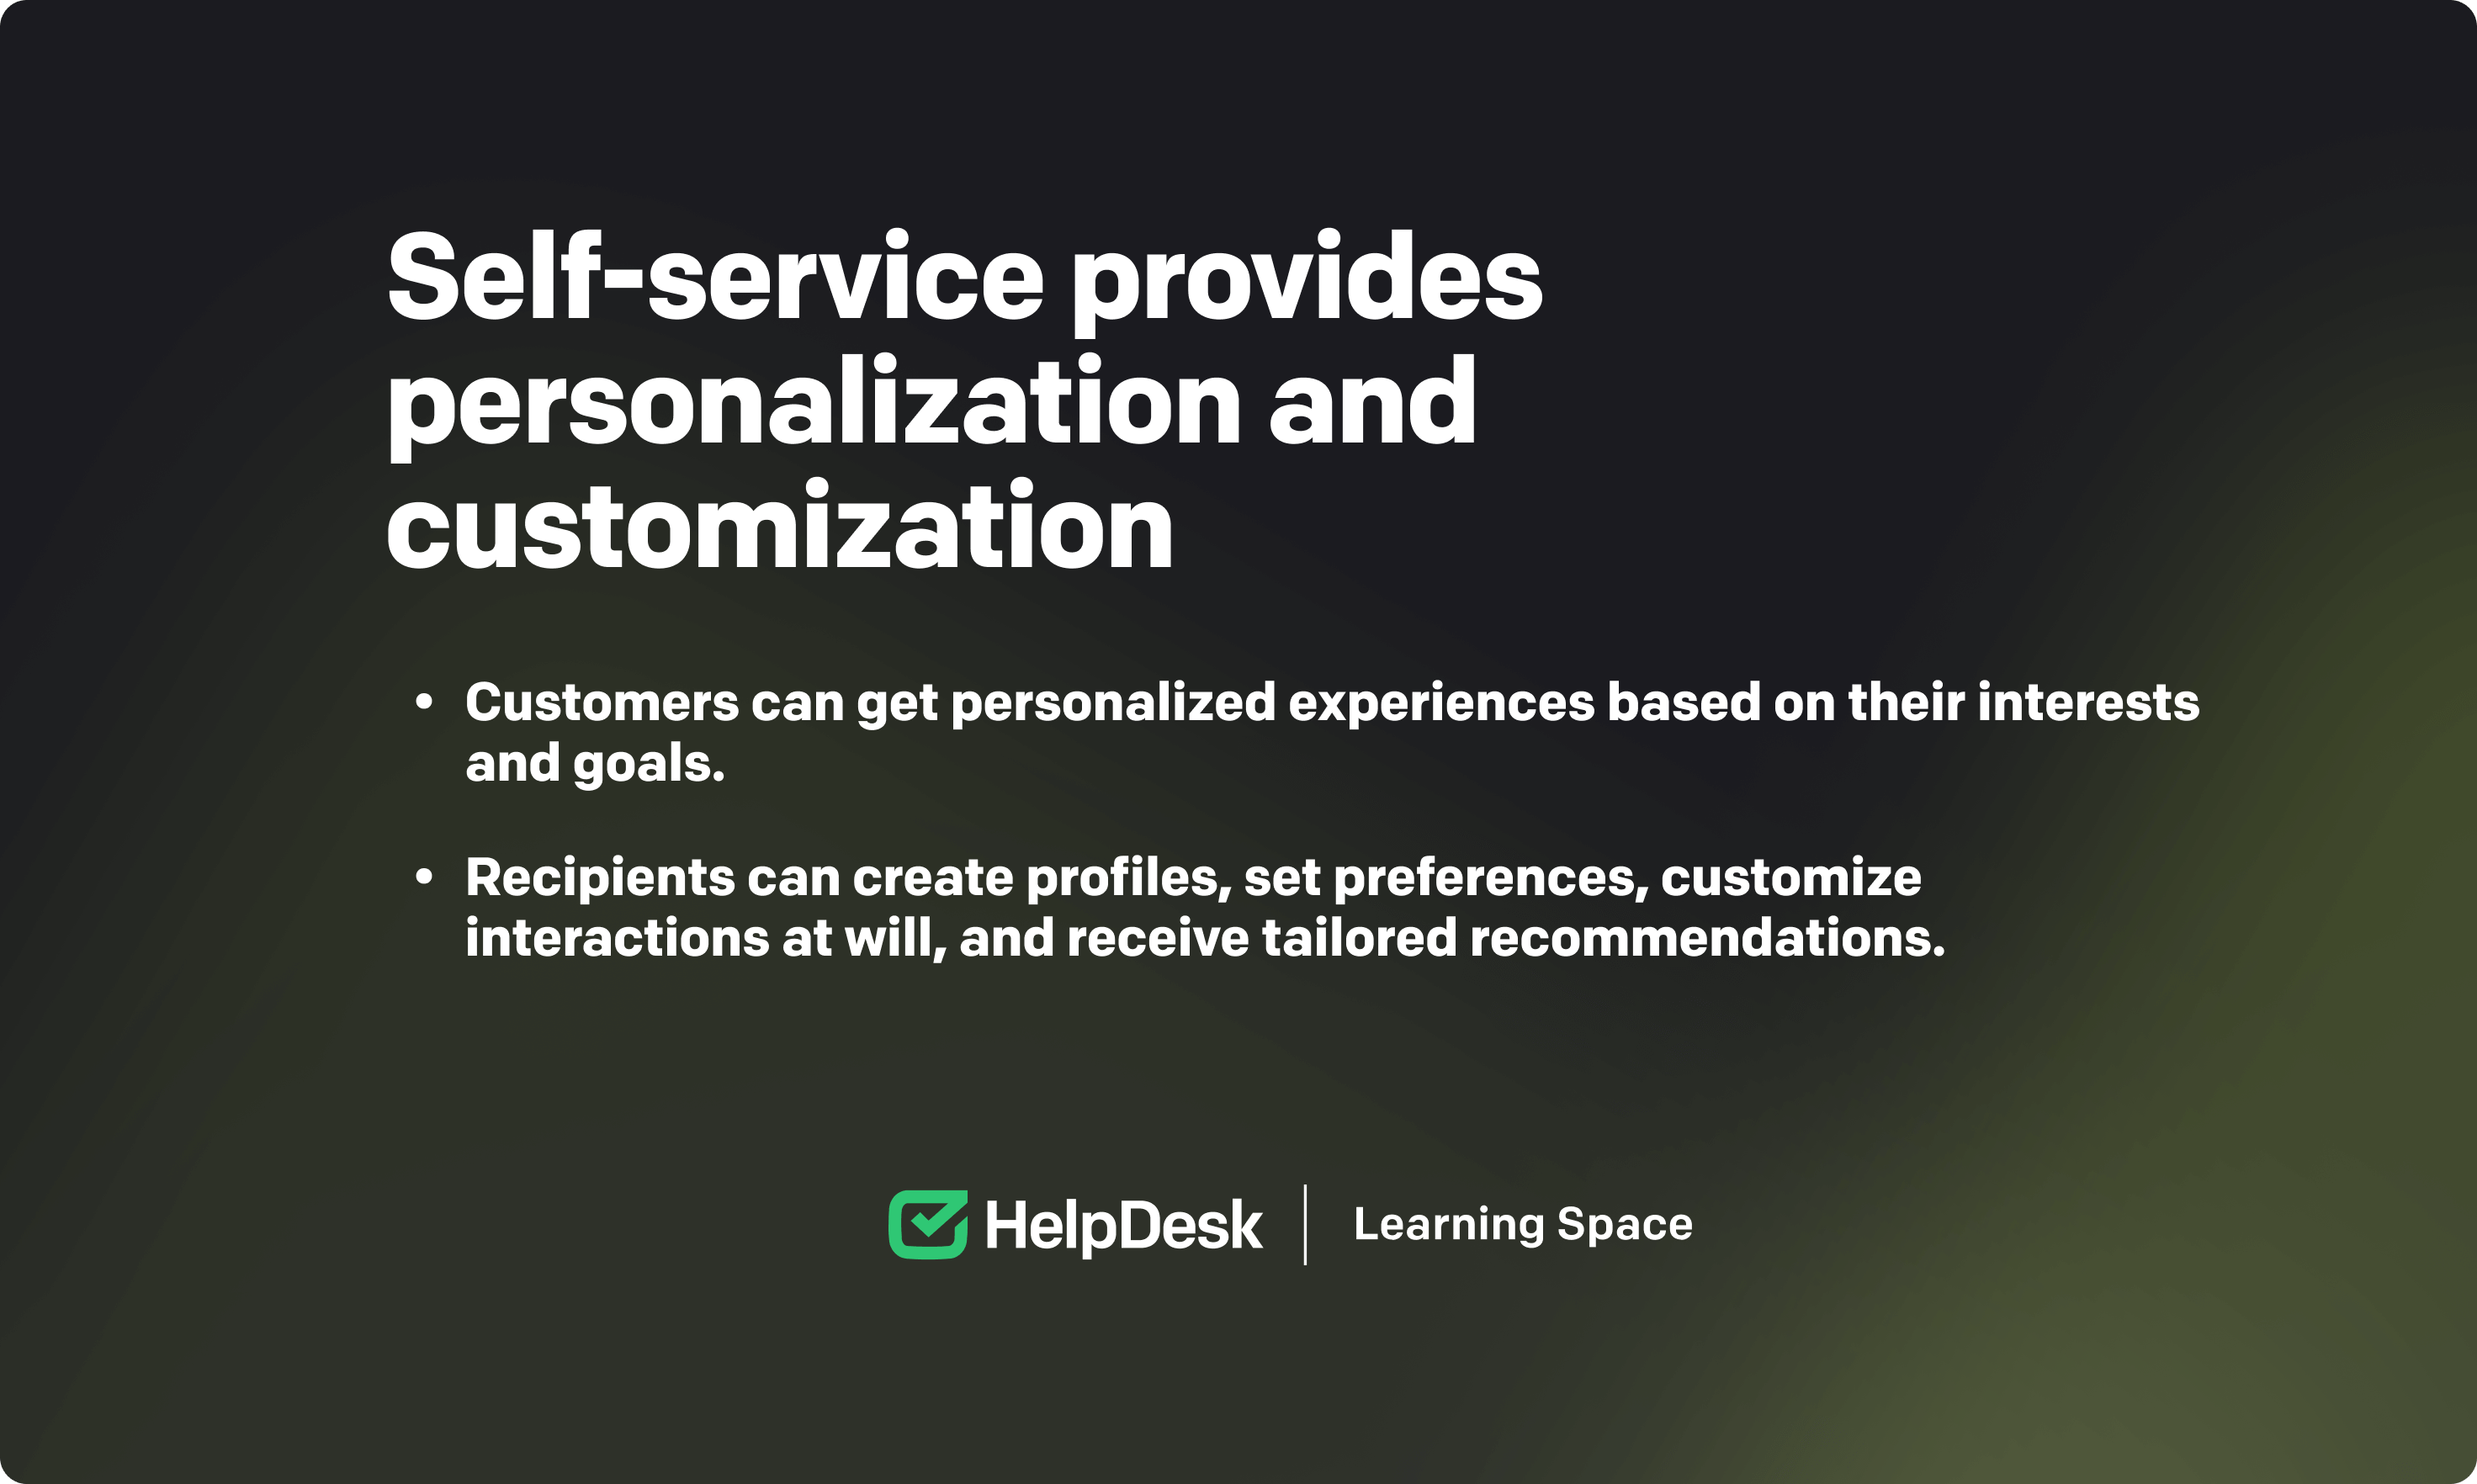 Self-service benefits for customers: personalization and customization